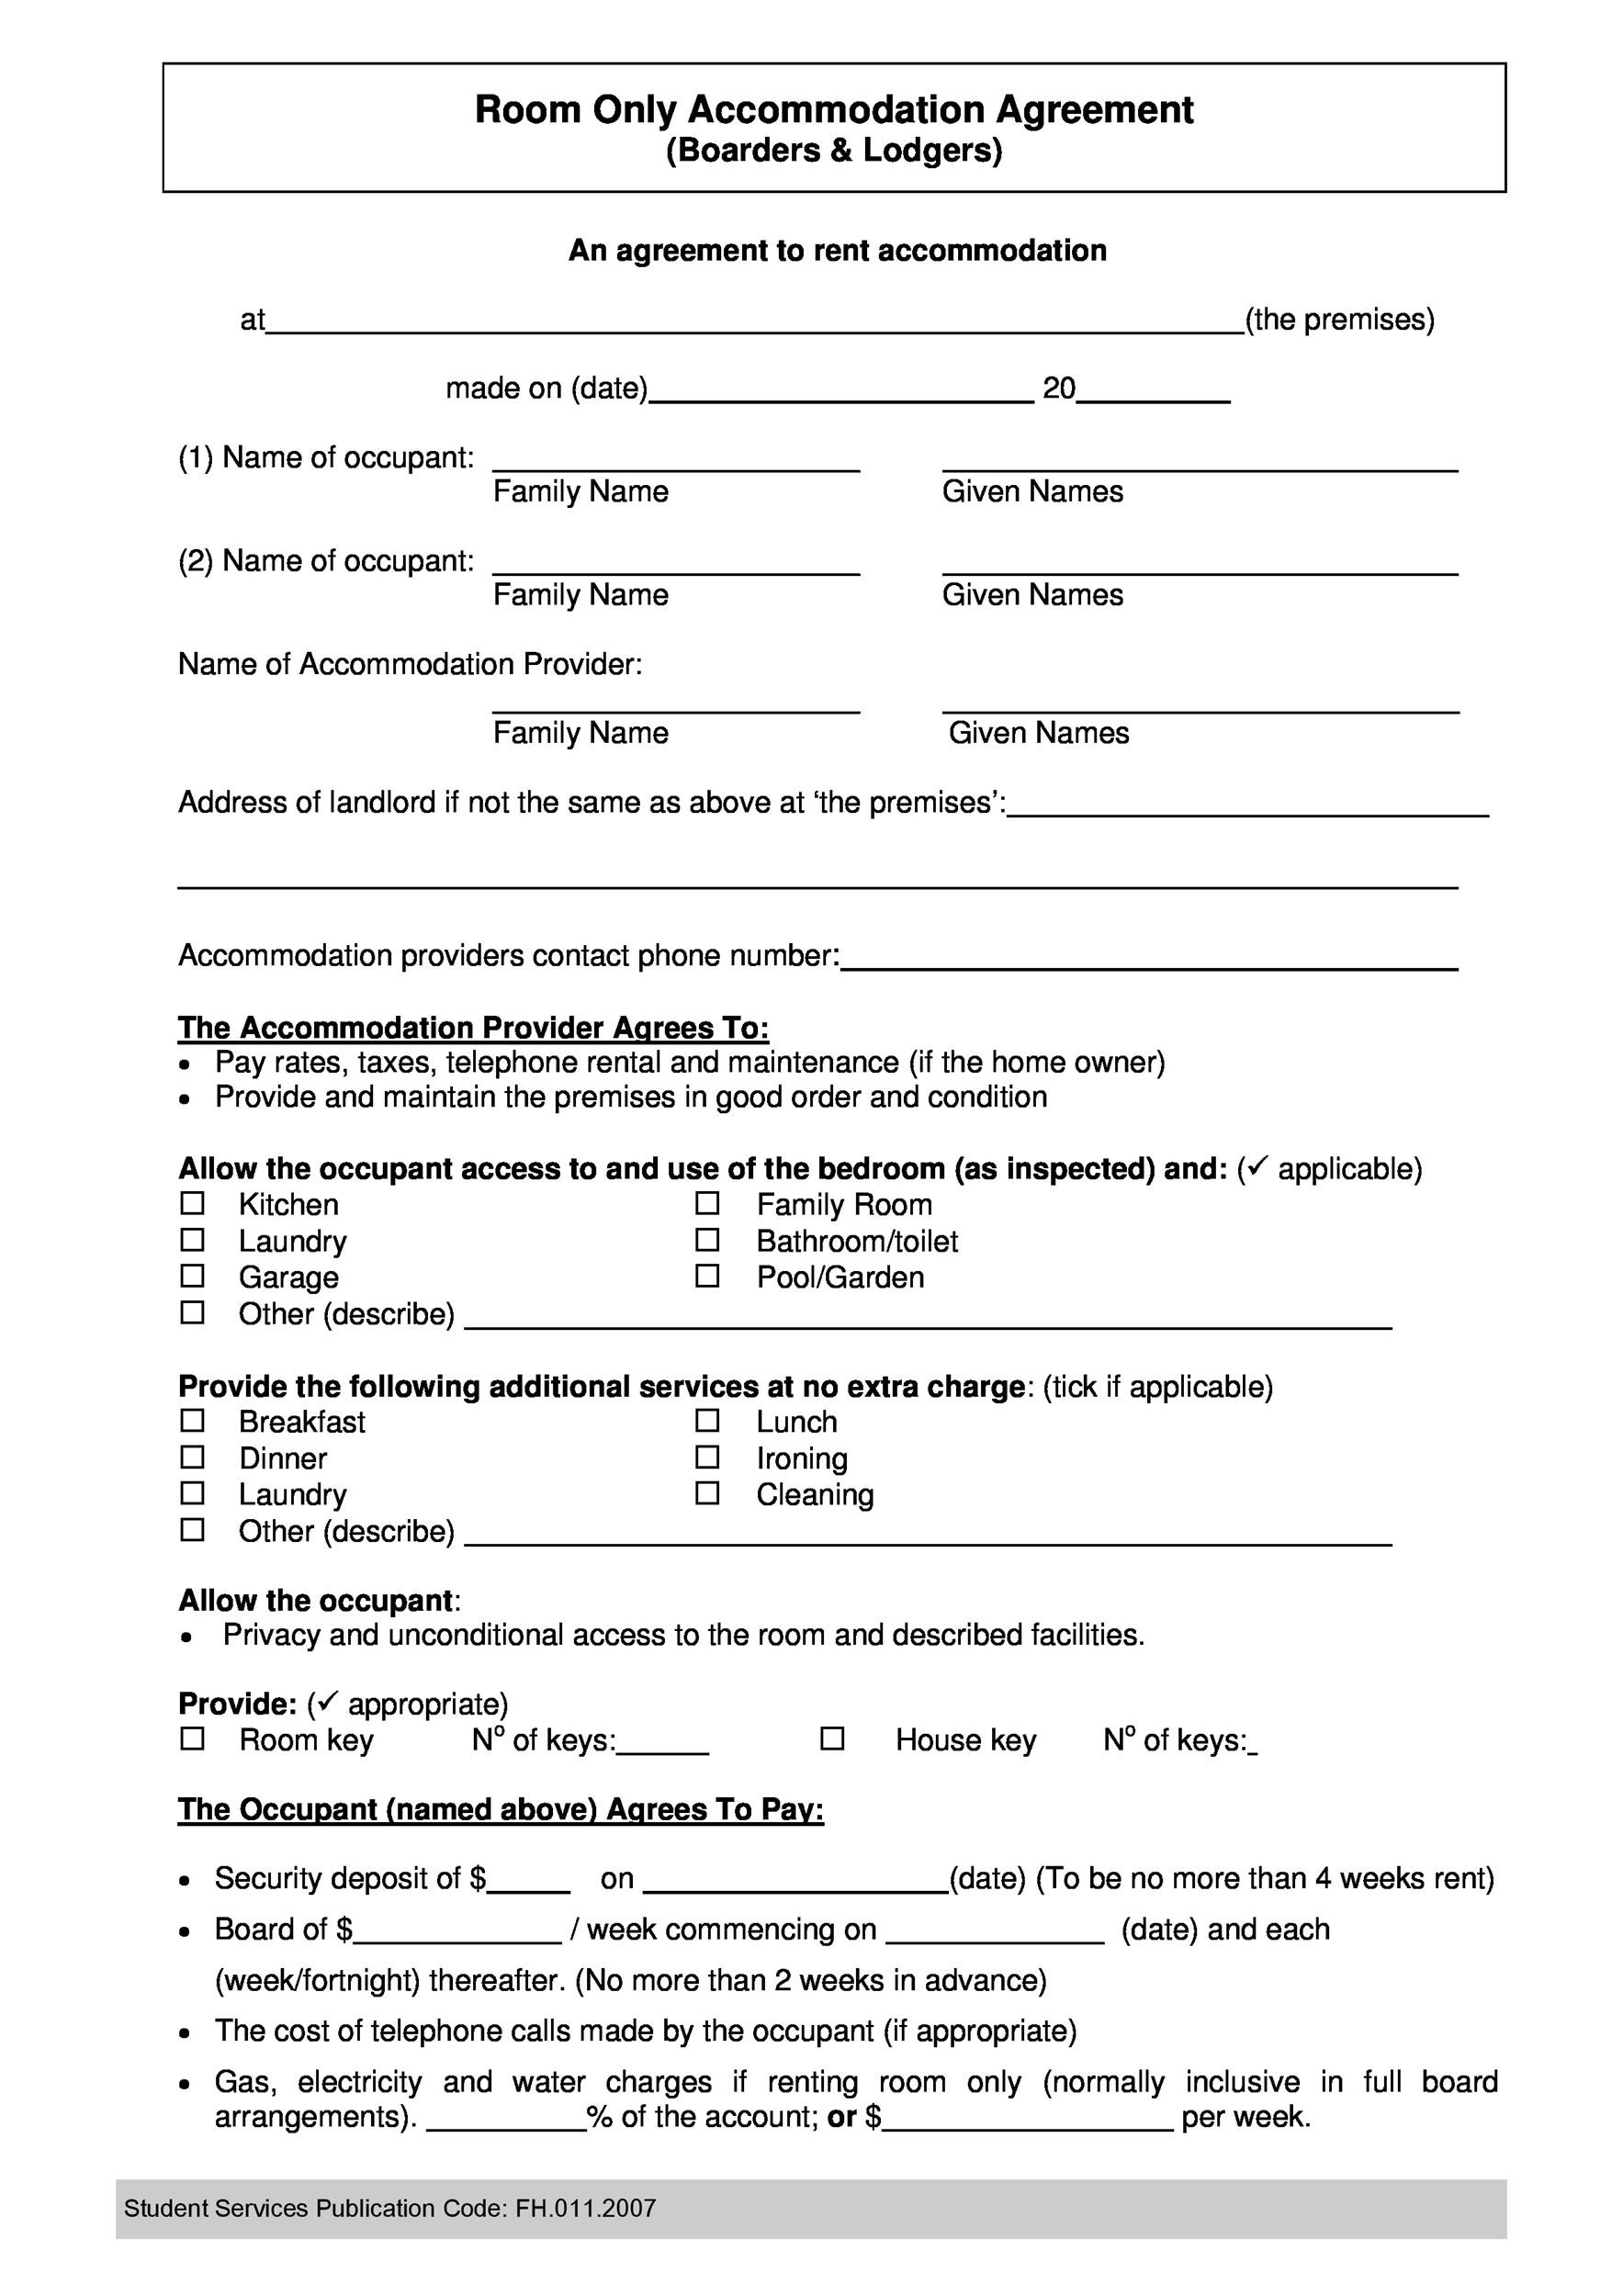 40+ Free Roommate Agreement Templates & Forms (Word, PDF)